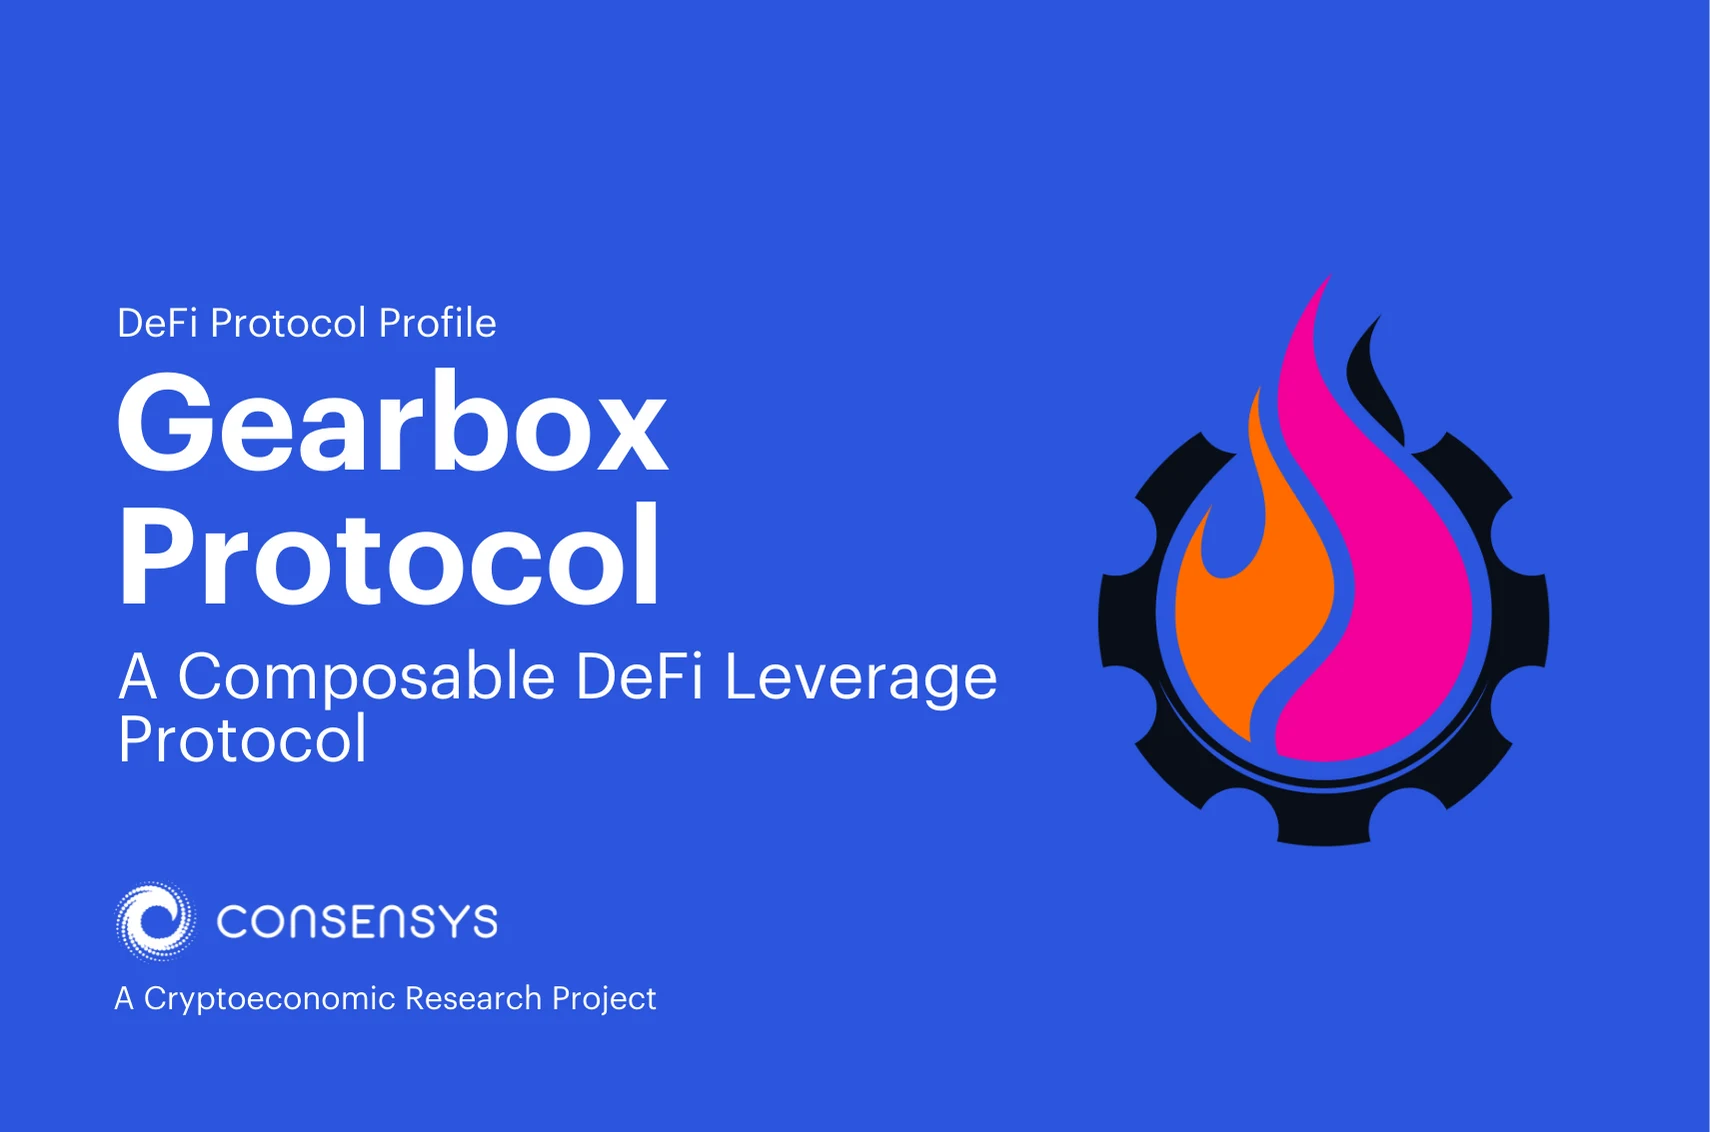 Image: Gearbox Protocol: A Composable Leverage Protocol in DeFi